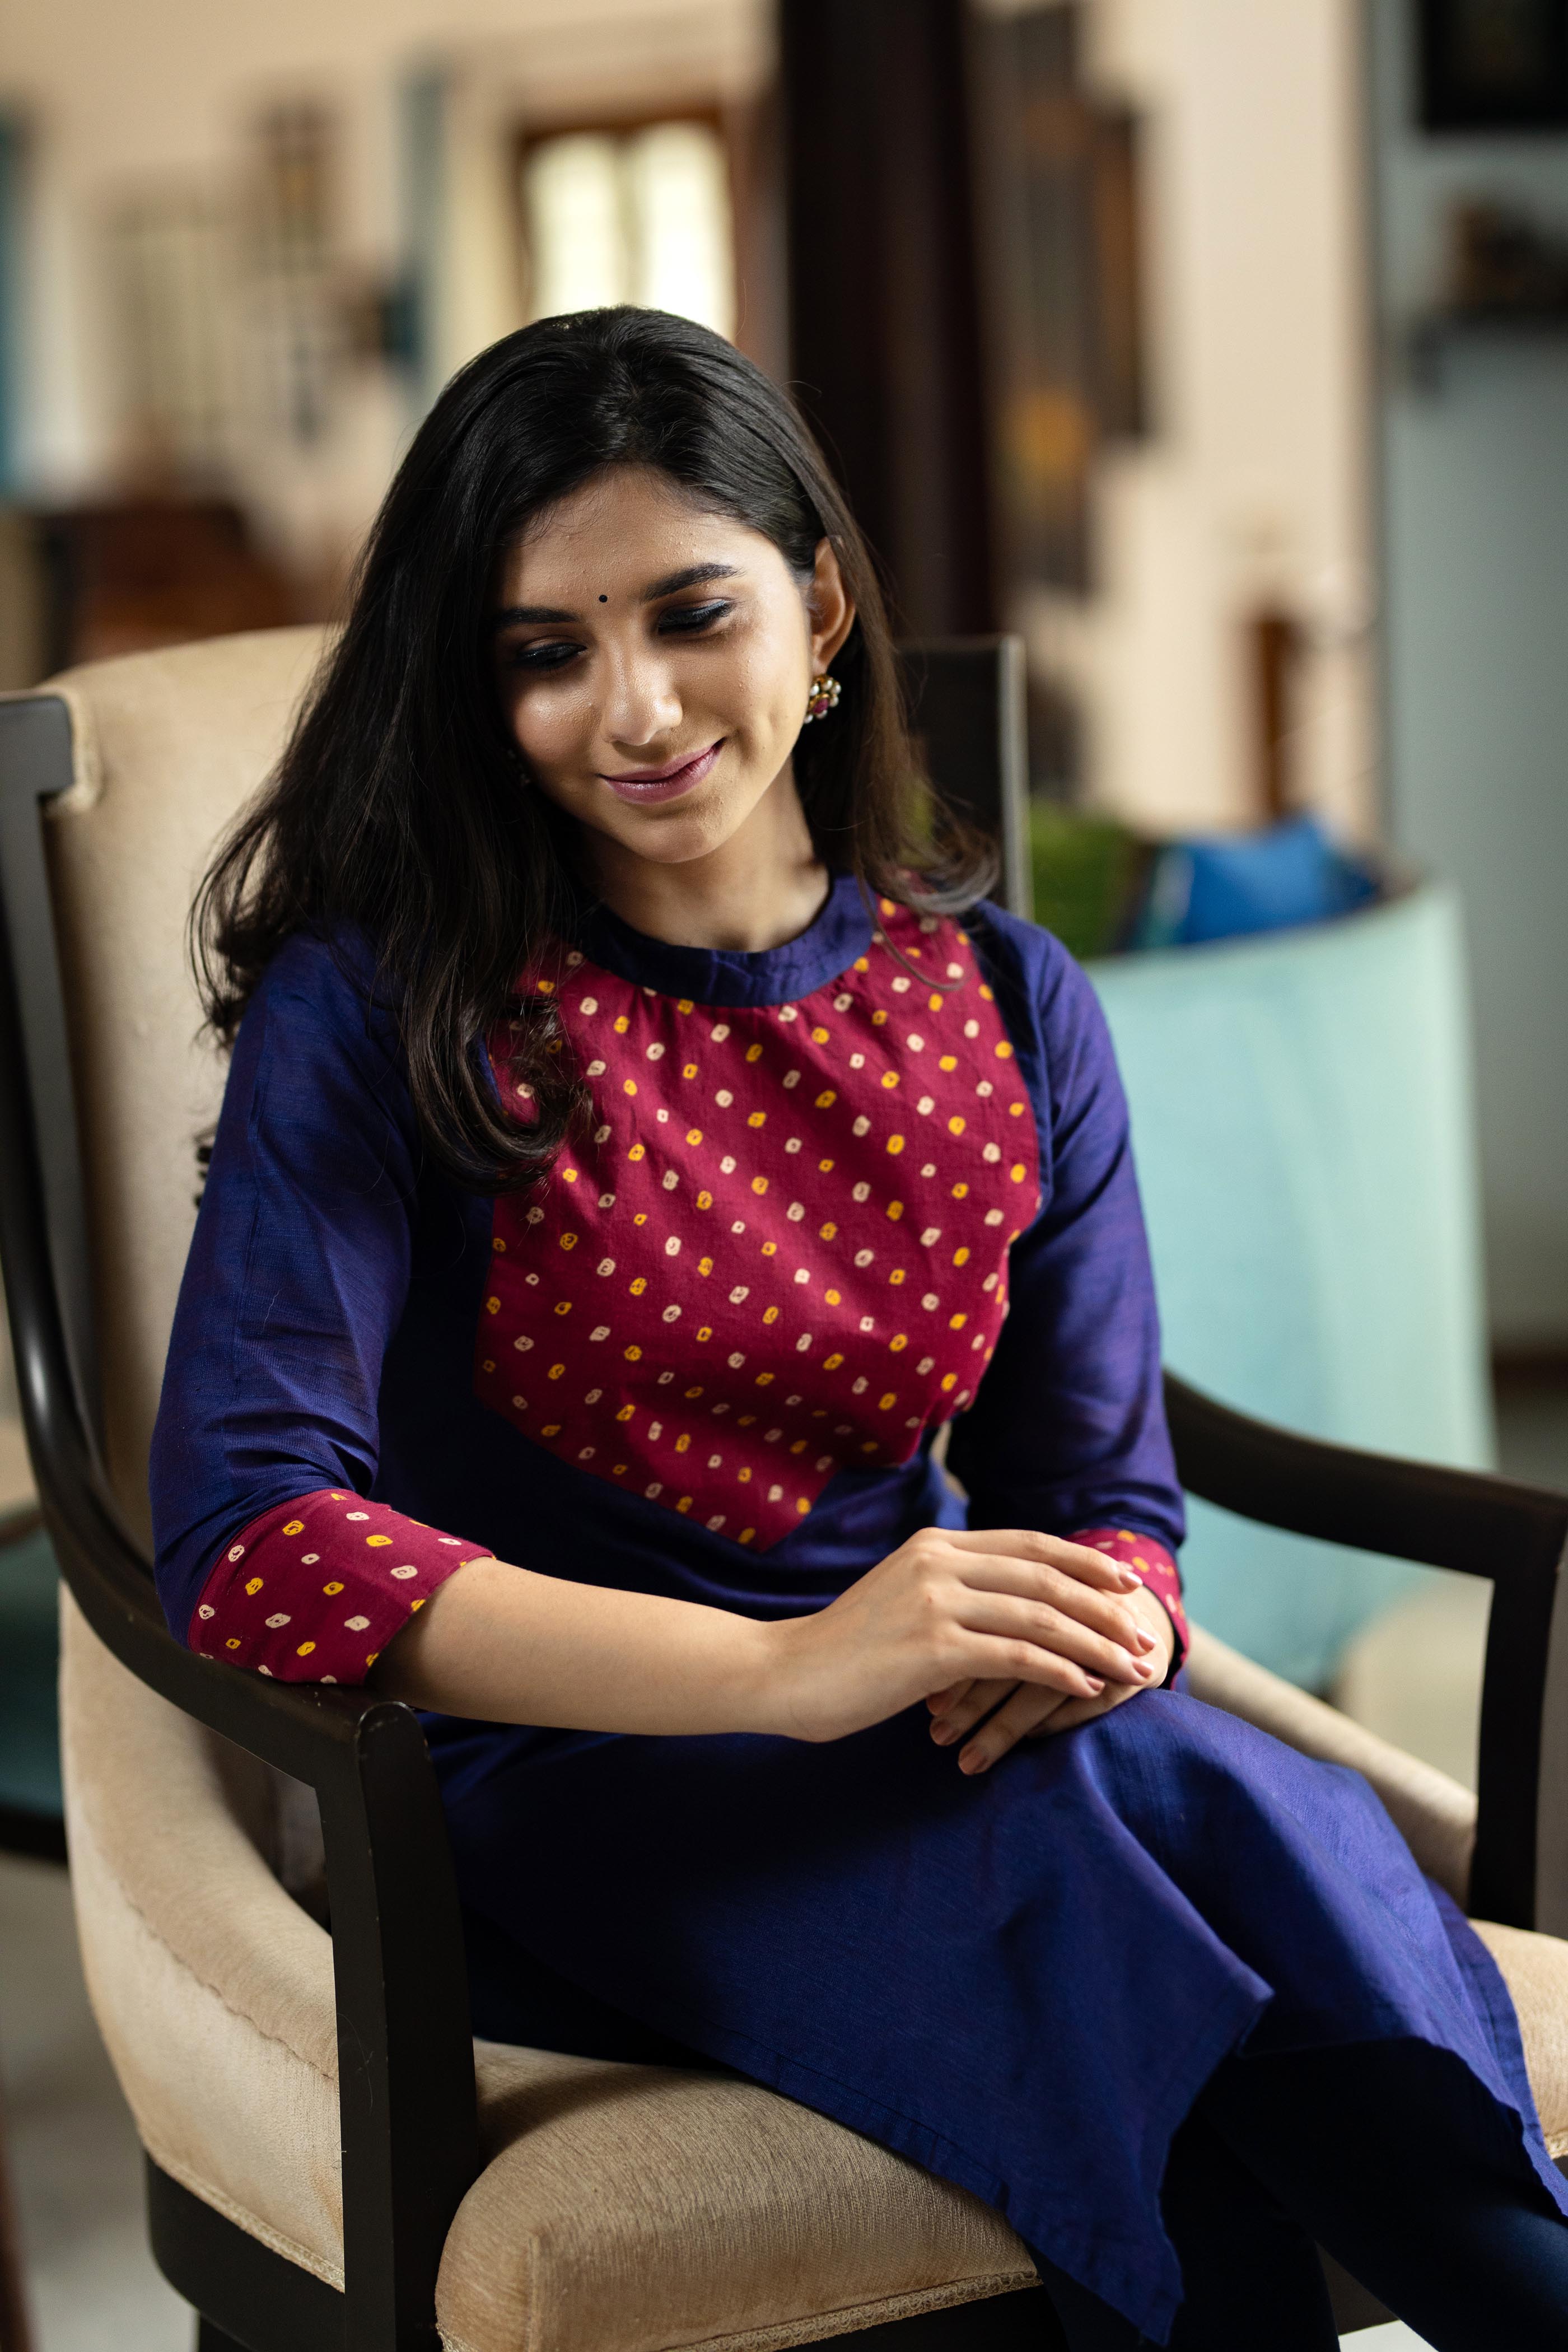 Shop stylish blue kurti with bandini yoke for work or office wear. Simple yet designer collar kurti in cotton suitable for formal or casual occasions.